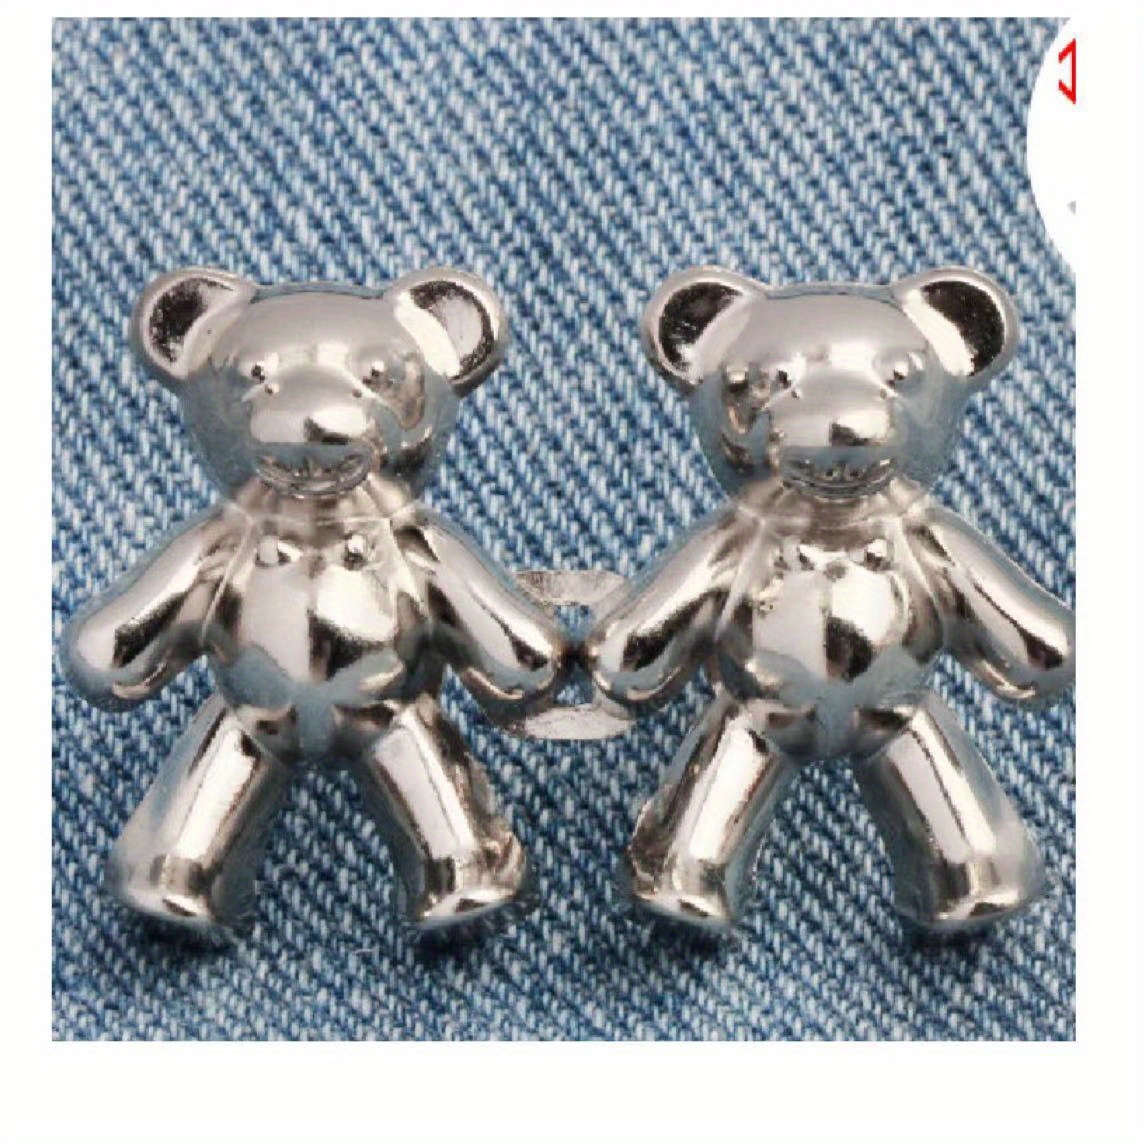 4pairs Cute Bear Button Pins For Jeans, No Sew And No Tools Instant Pant  Waist Tightener, Adjustable Jean Buttons Pins For Loose Jeans 4 Sets Jeans  Button Replacement Pant Clips For Waist